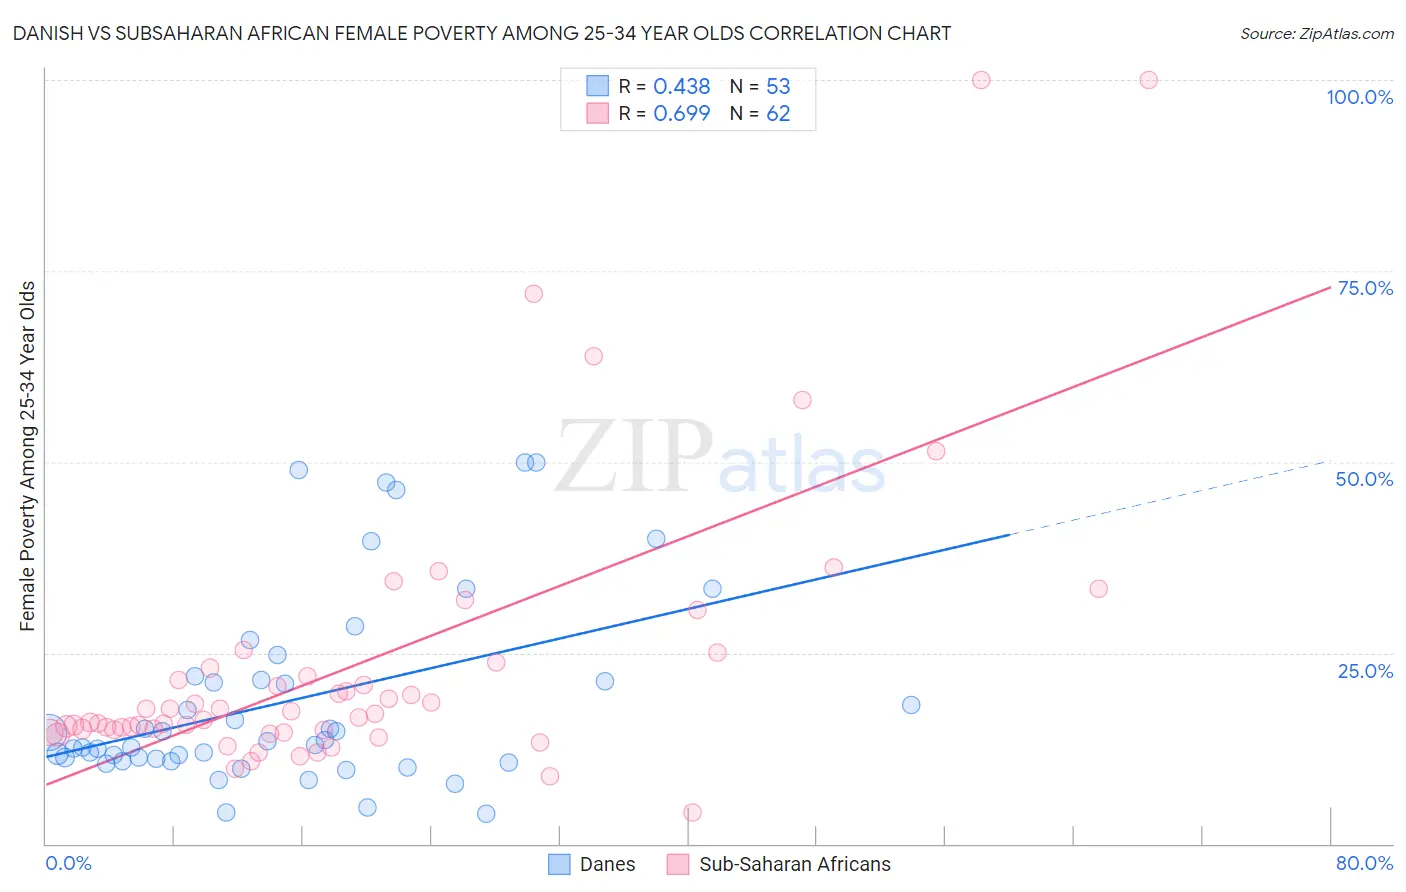 Danish vs Subsaharan African Female Poverty Among 25-34 Year Olds